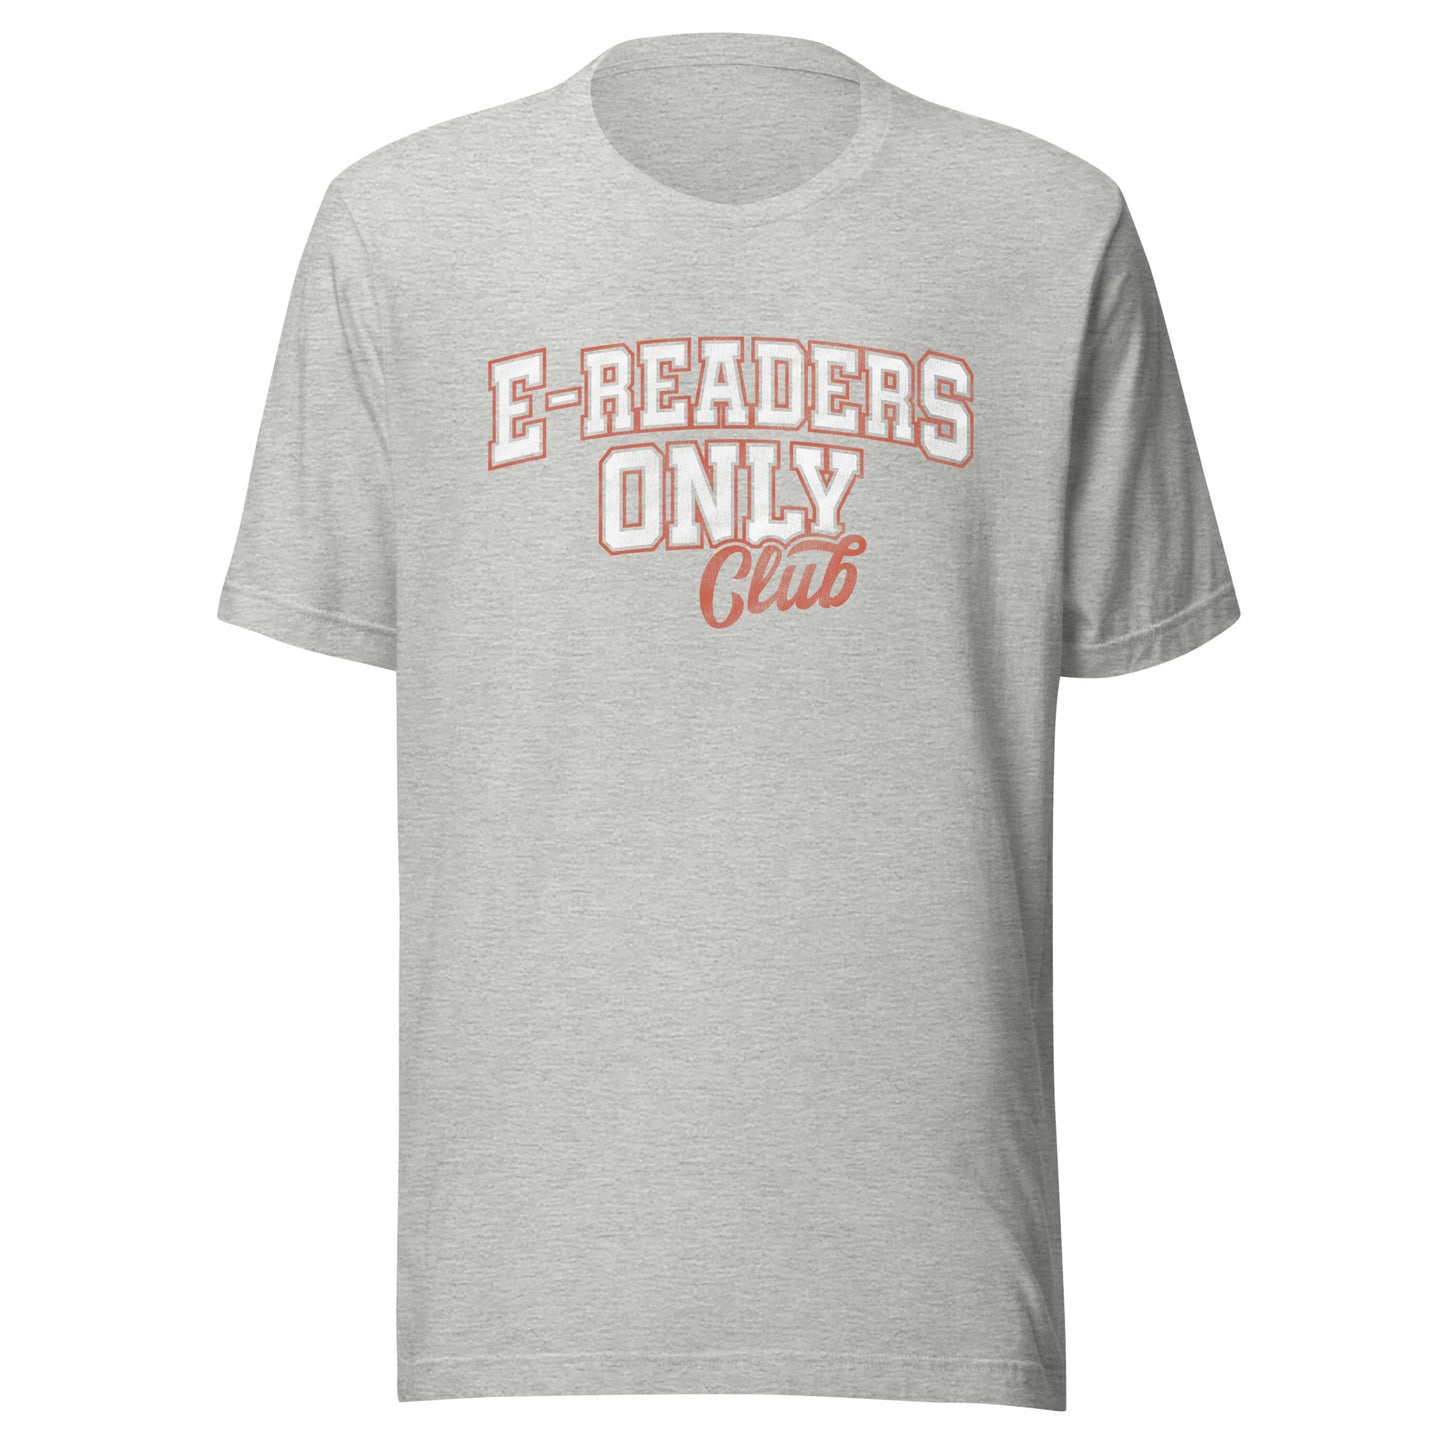 e-readers only club t-shirt